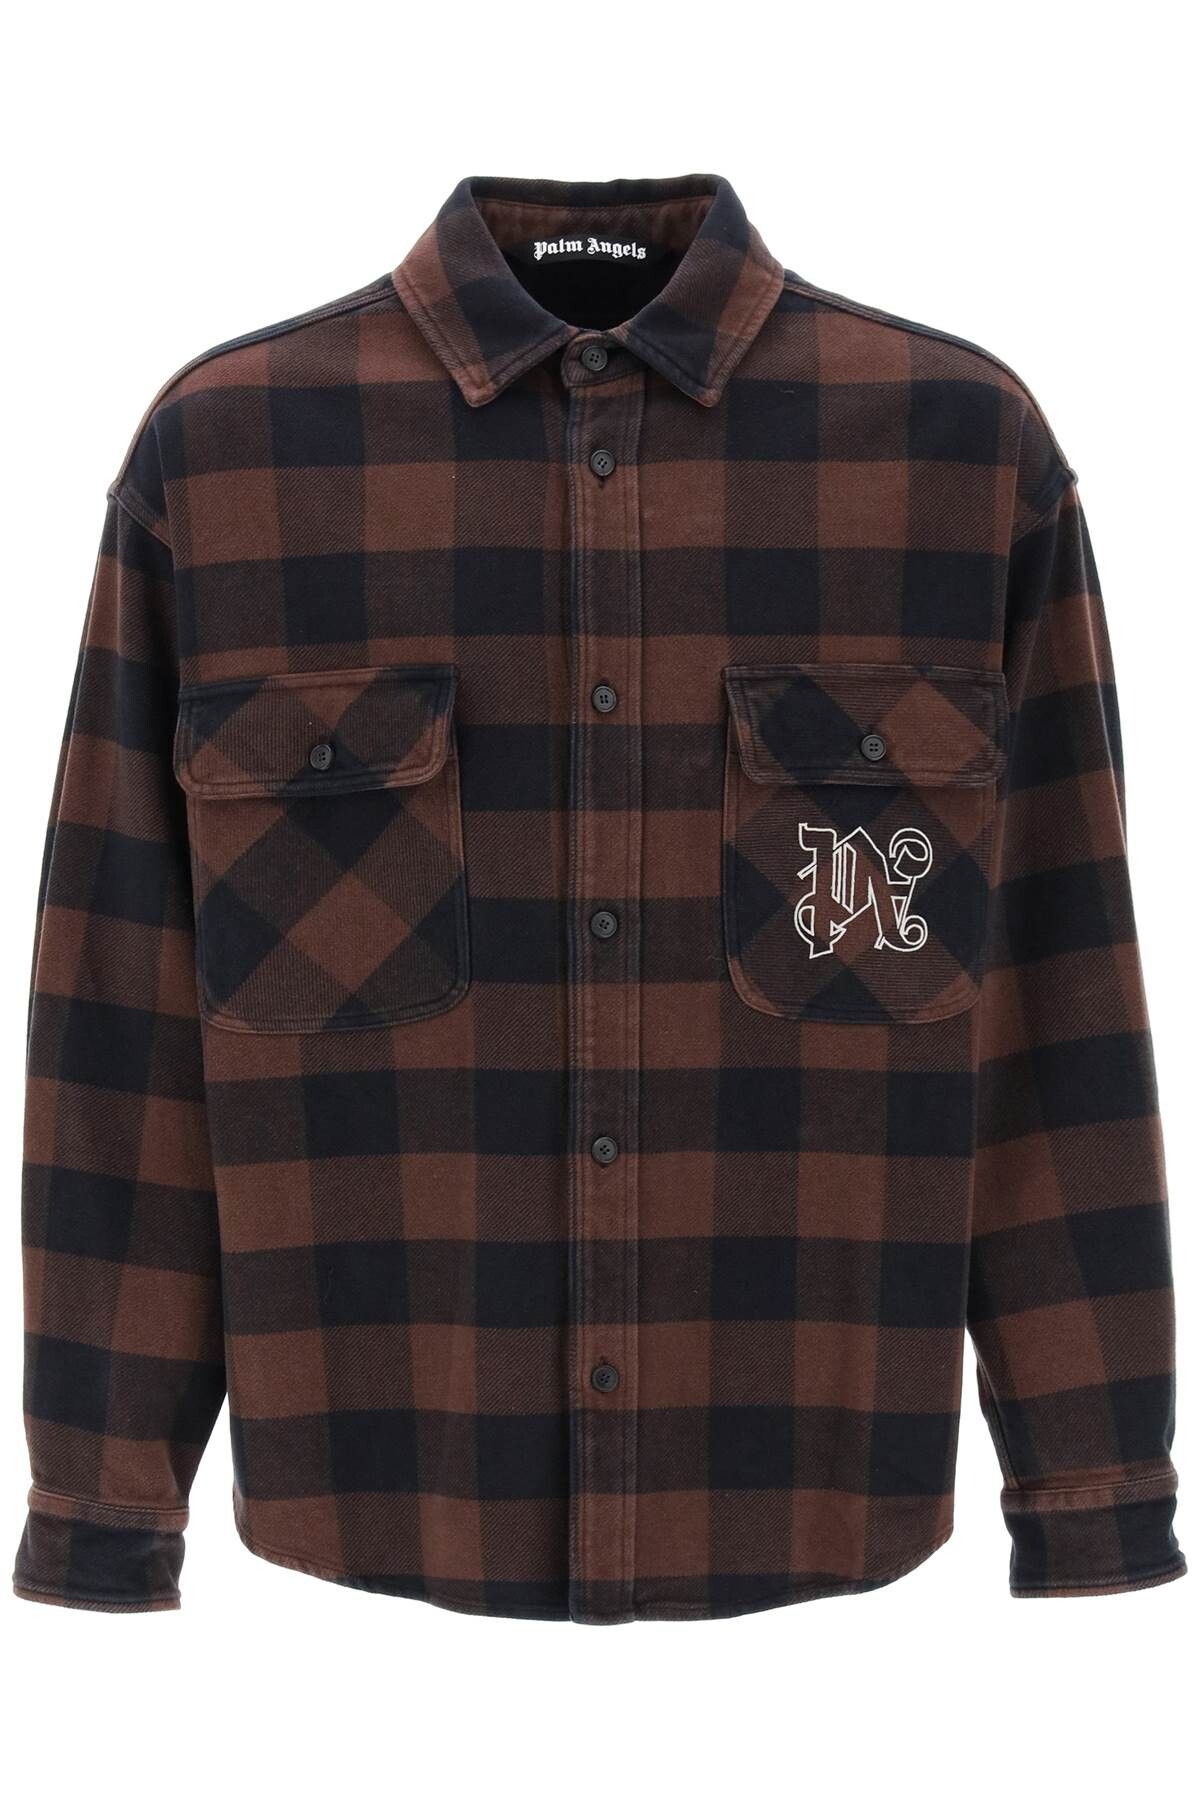 Palm Angels Palm Angels Flannel Overshirt With Check Motif | Grailed